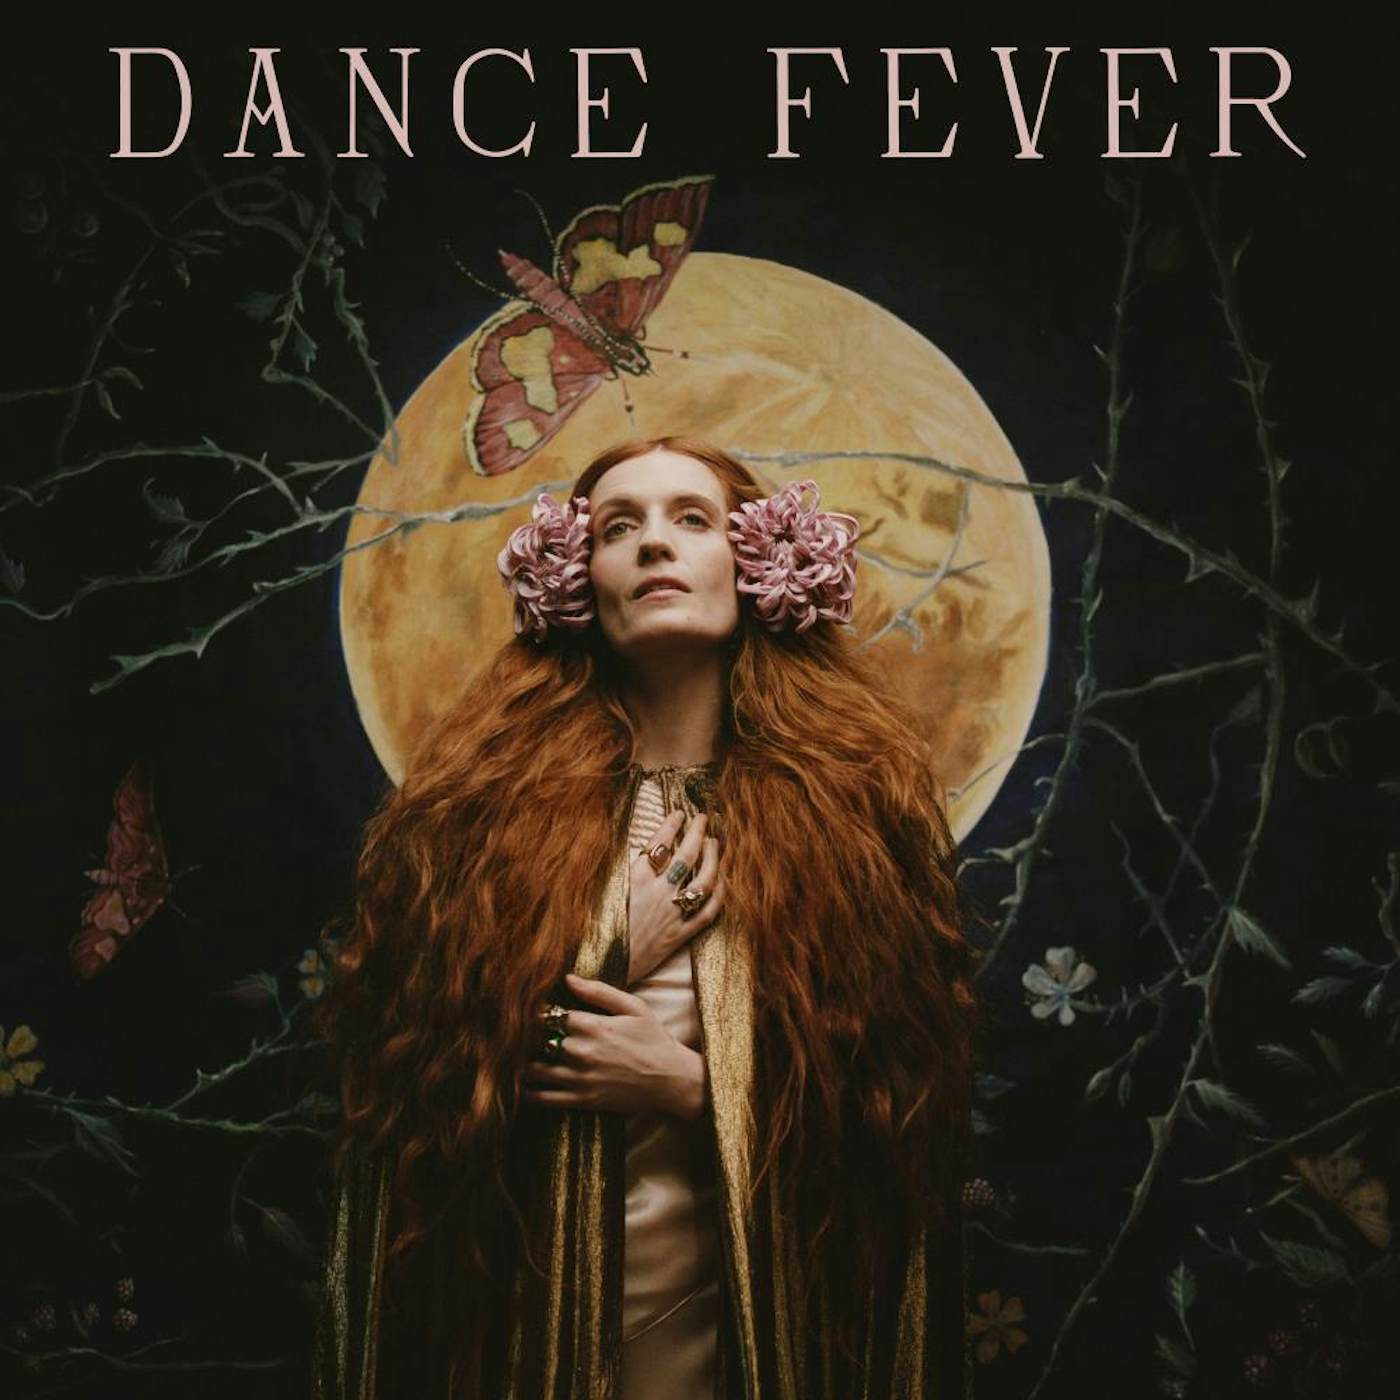 Florence + The Machine DANCE FEVER CD